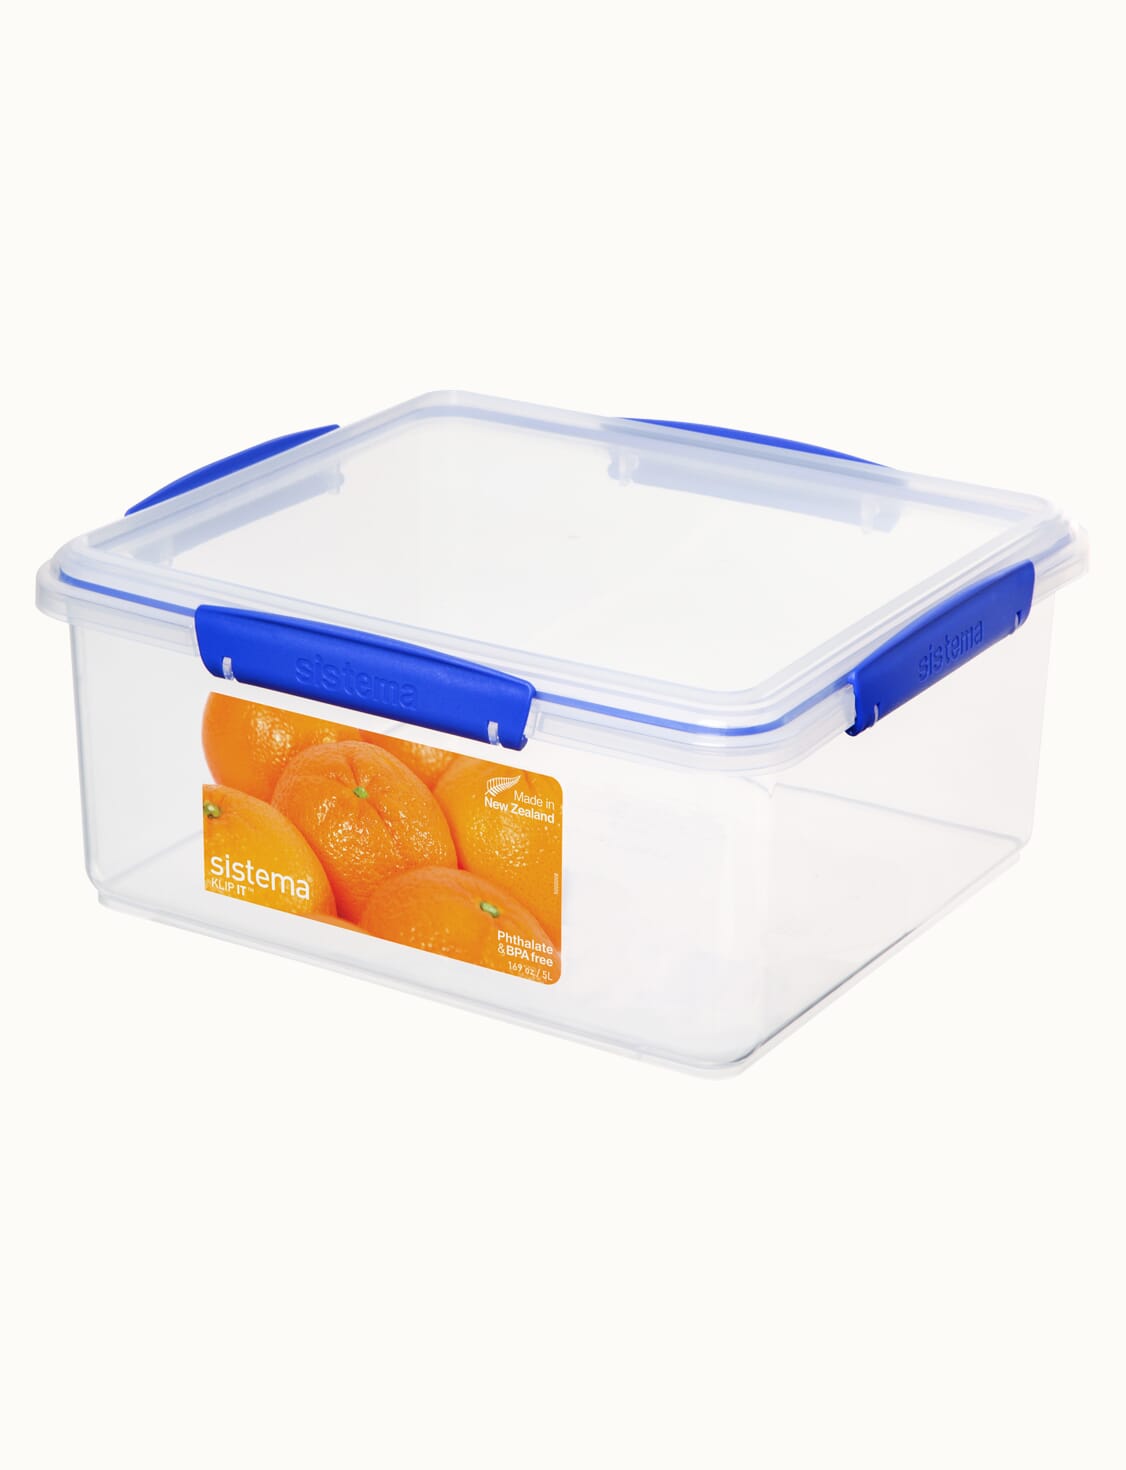 Kitchen Details 1-oz Plastic Bpa-free Reusable Egg Holder with Lid in the  Food Storage Containers department at